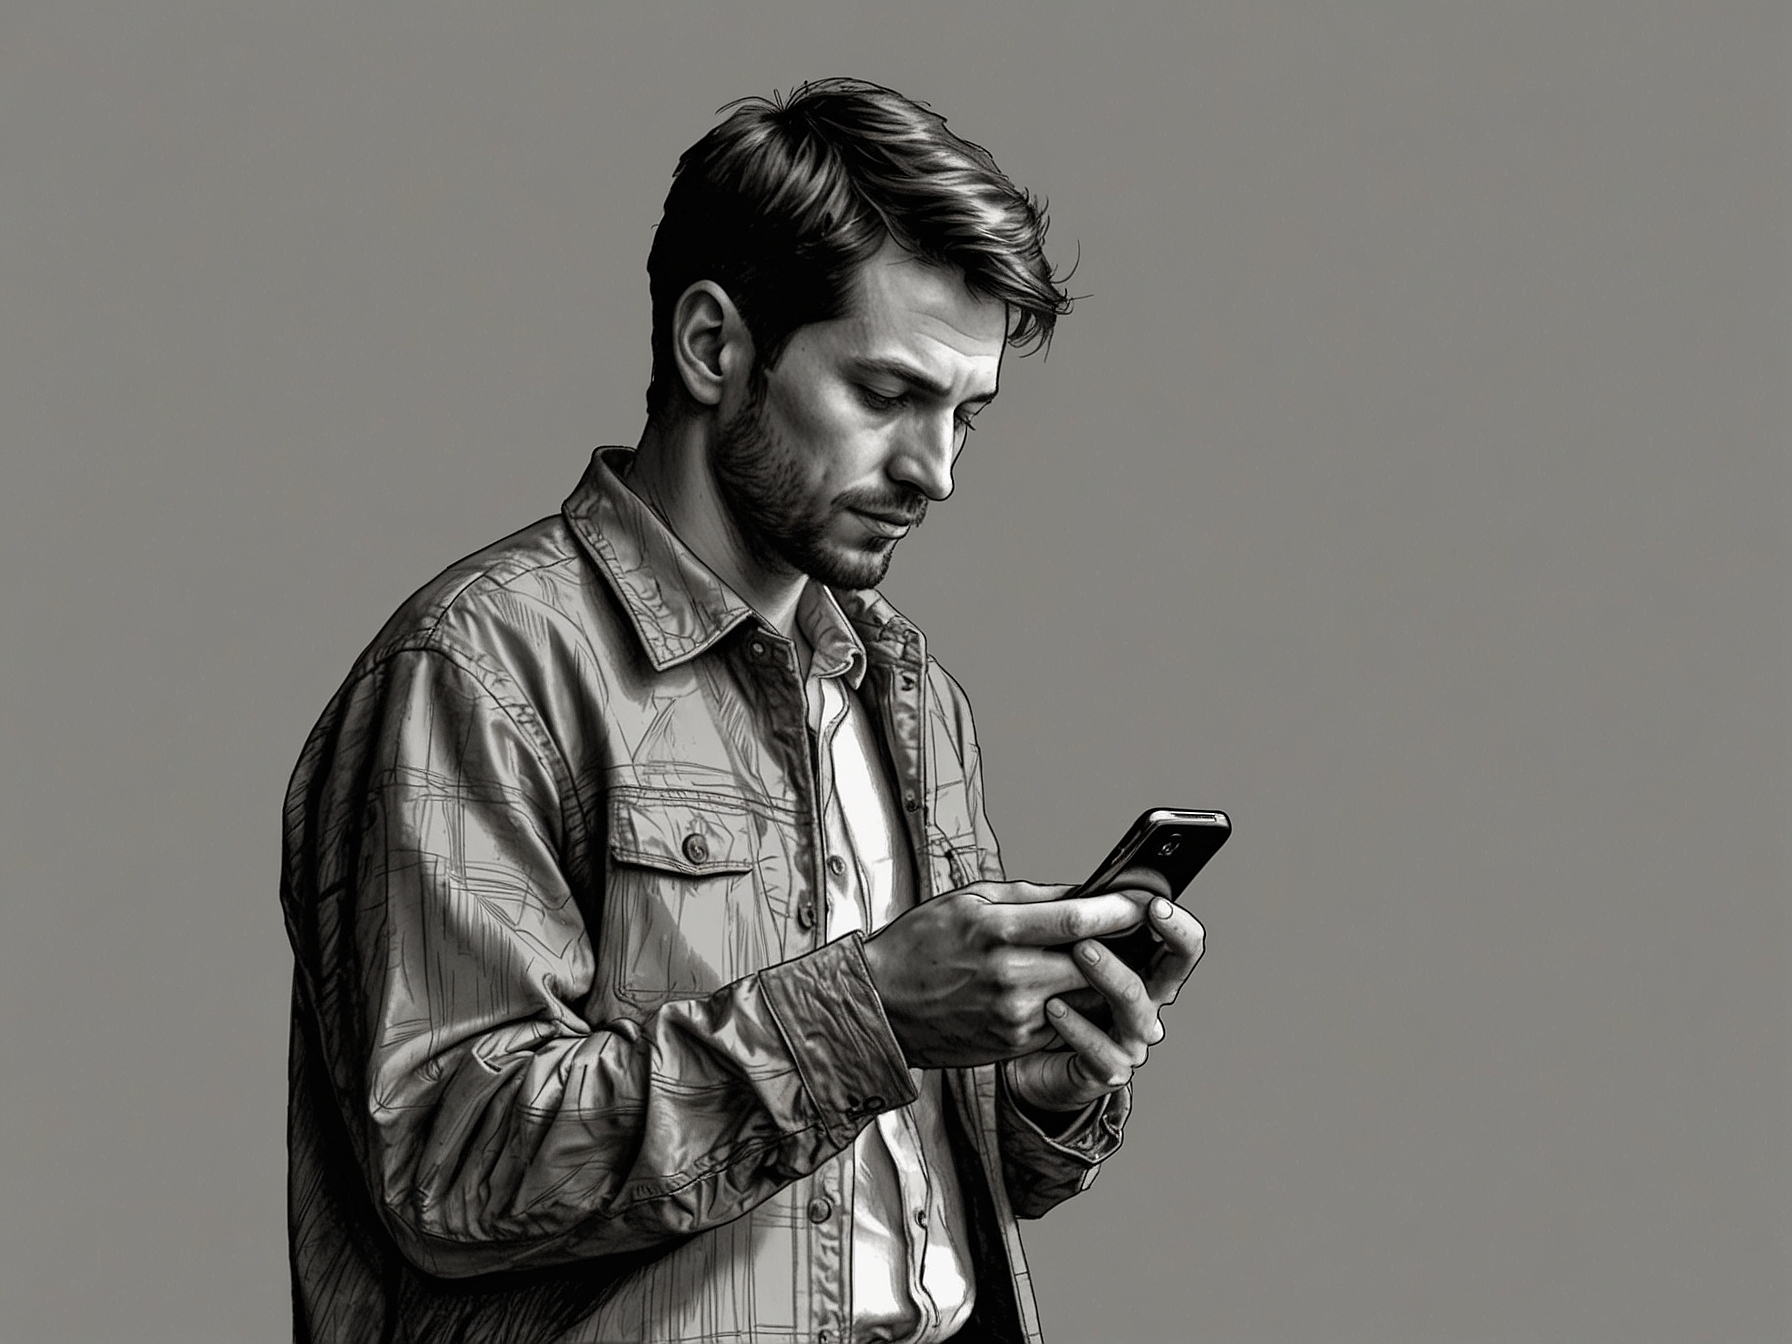 A man checked his phone, symbolizing the need for constant attention and connection.